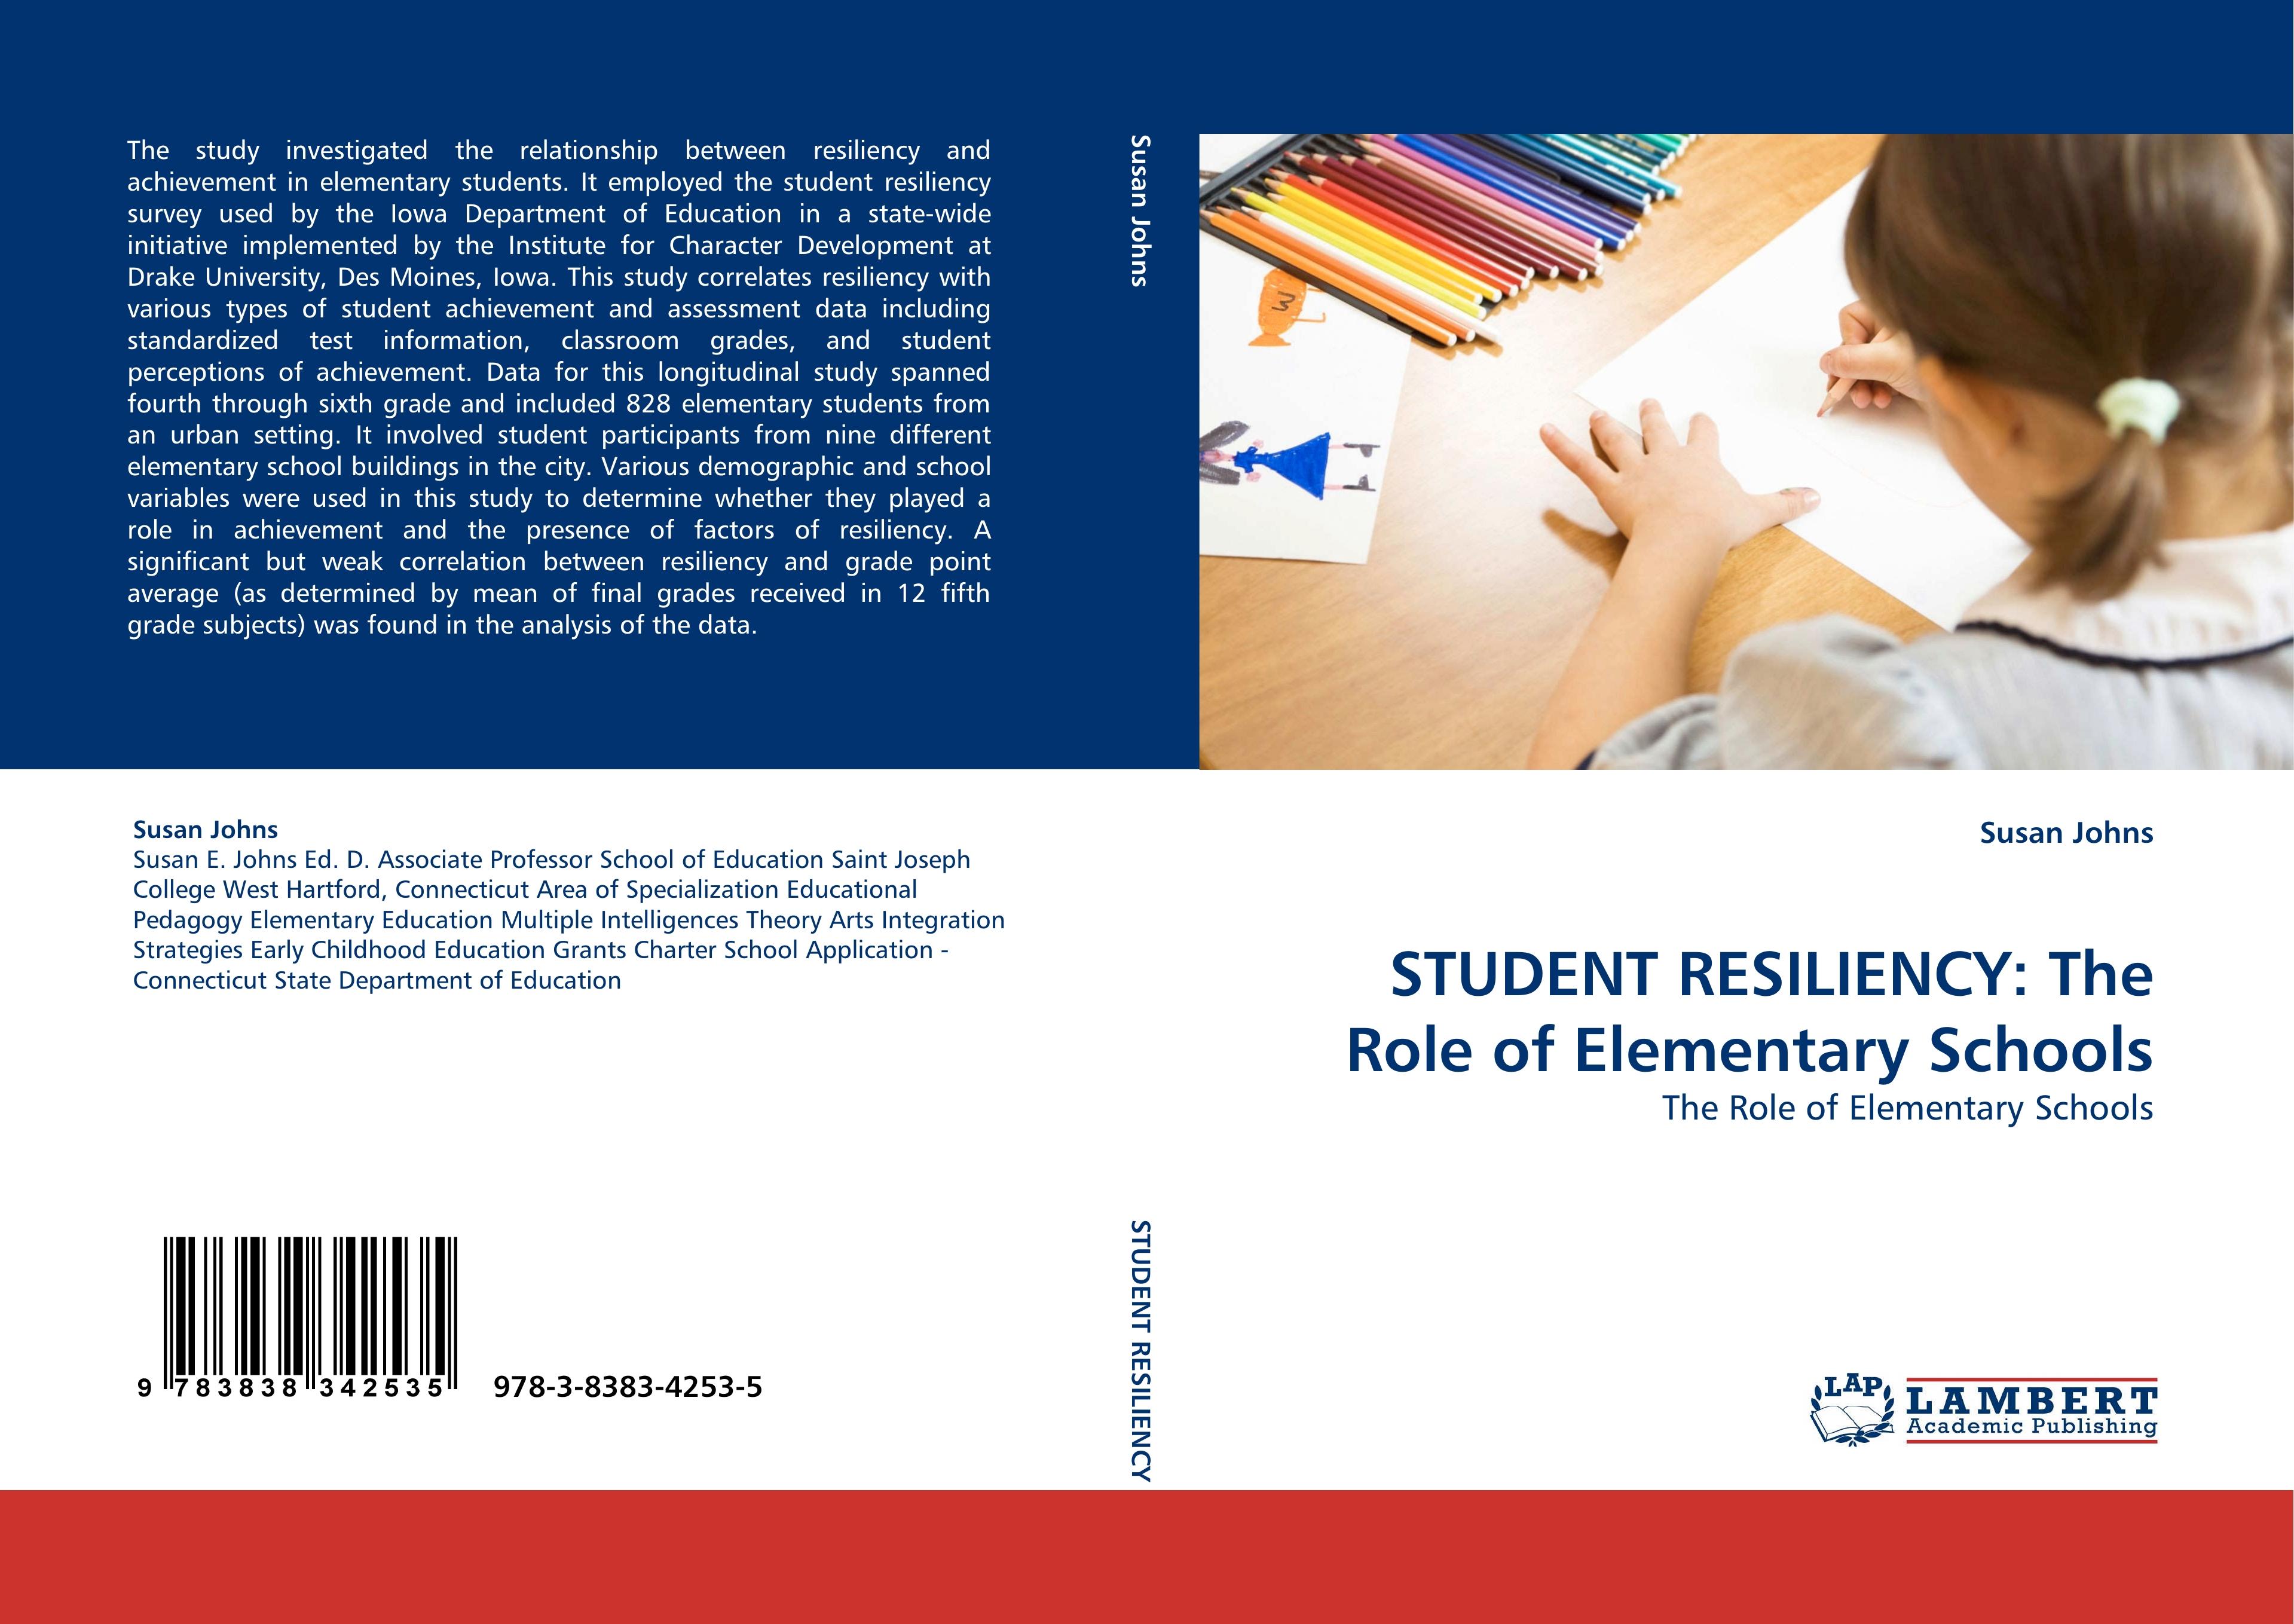 STUDENT RESILIENCY: The Role of Elementary Schools / The Role of Elementary Schools / Susan Johns / Taschenbuch / Paperback / 248 S. / Englisch / 2010 / LAP LAMBERT Academic Publishing - Johns, Susan